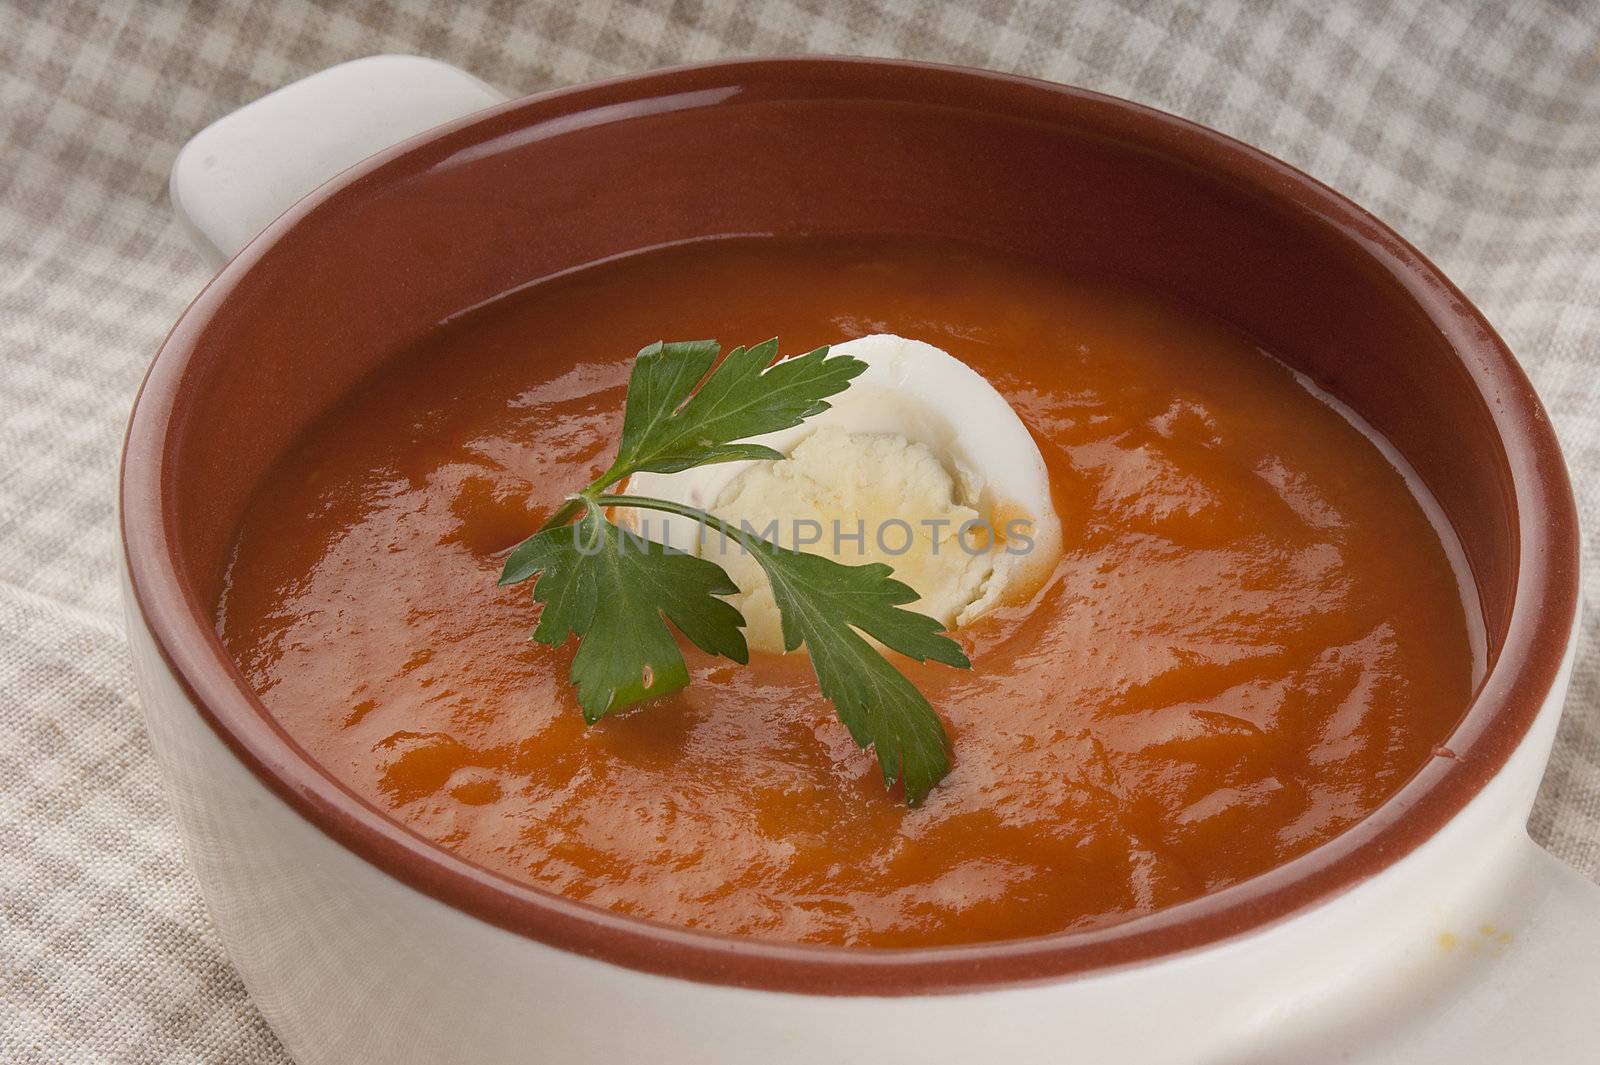 Tomato soup with parsley and boiled egg in white bowl